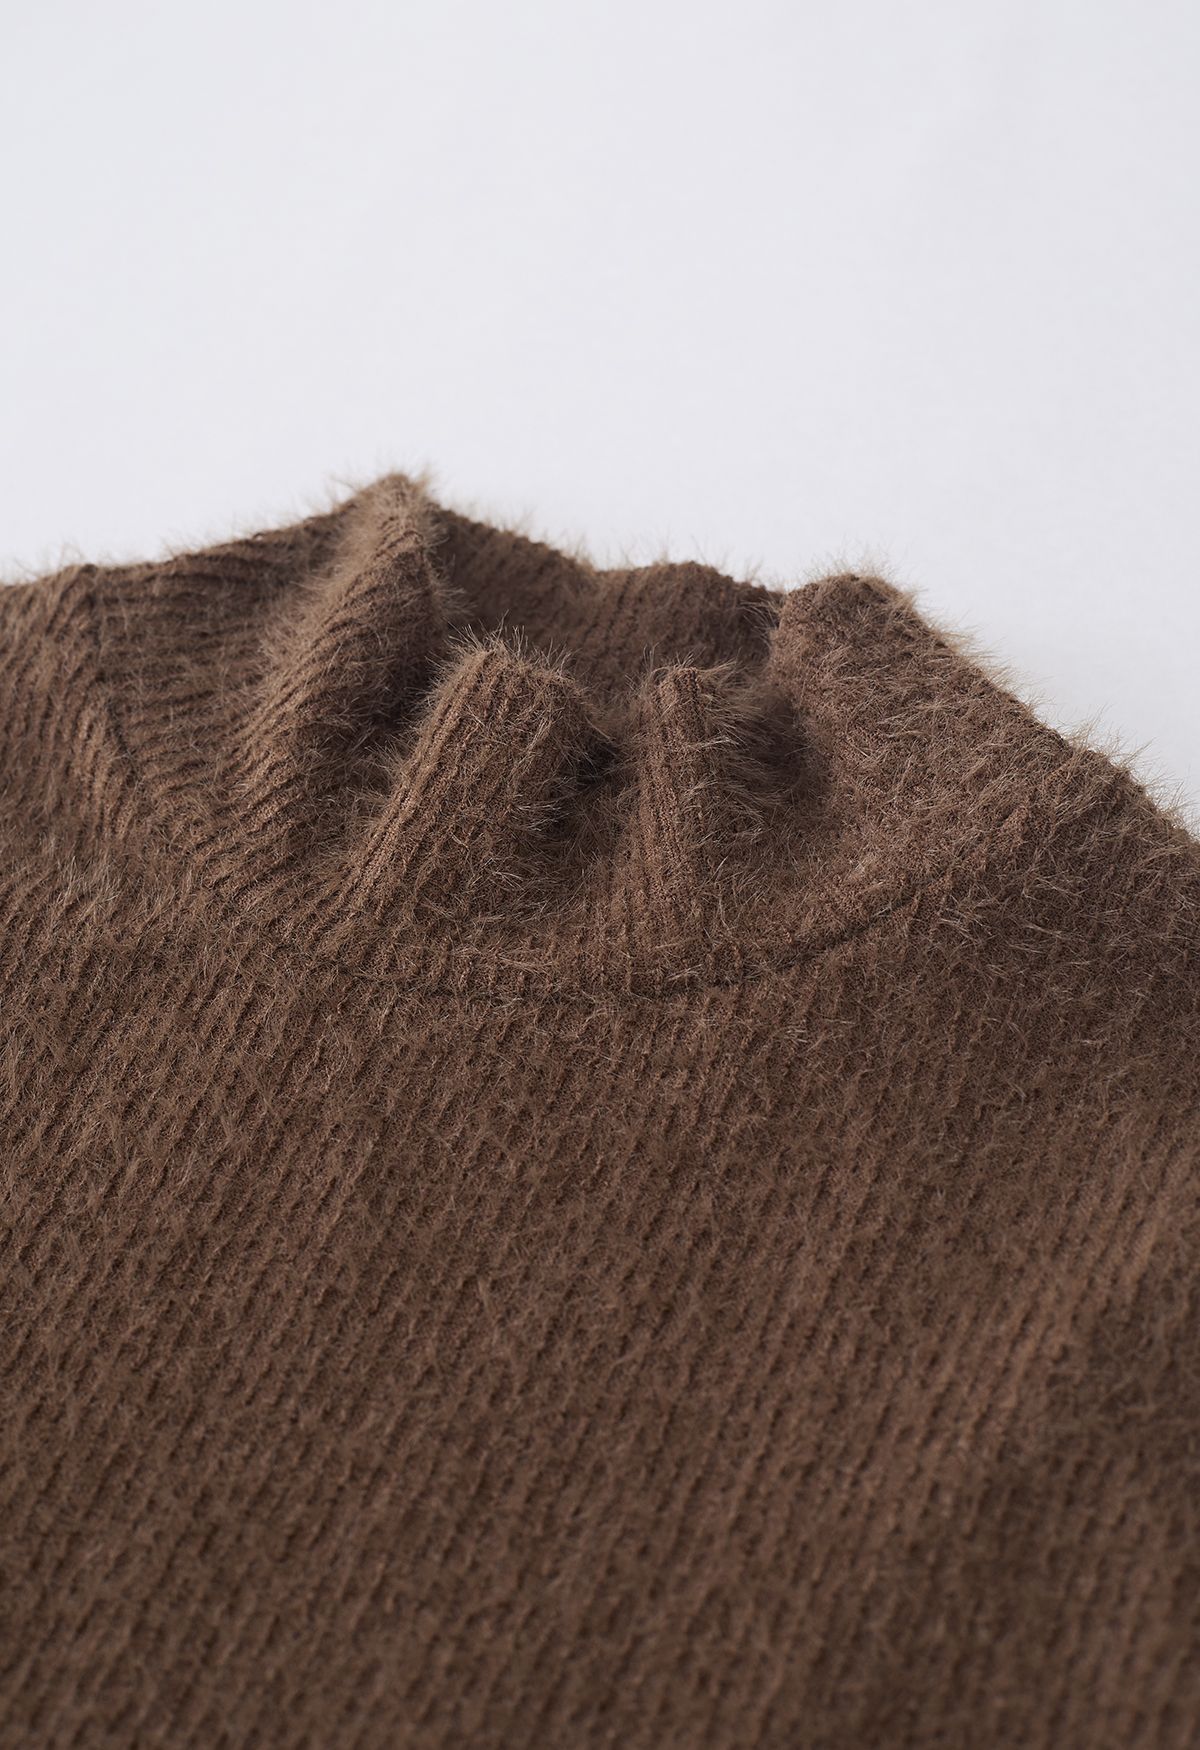 Fuzzy Mock Neck Knit Top in Brown